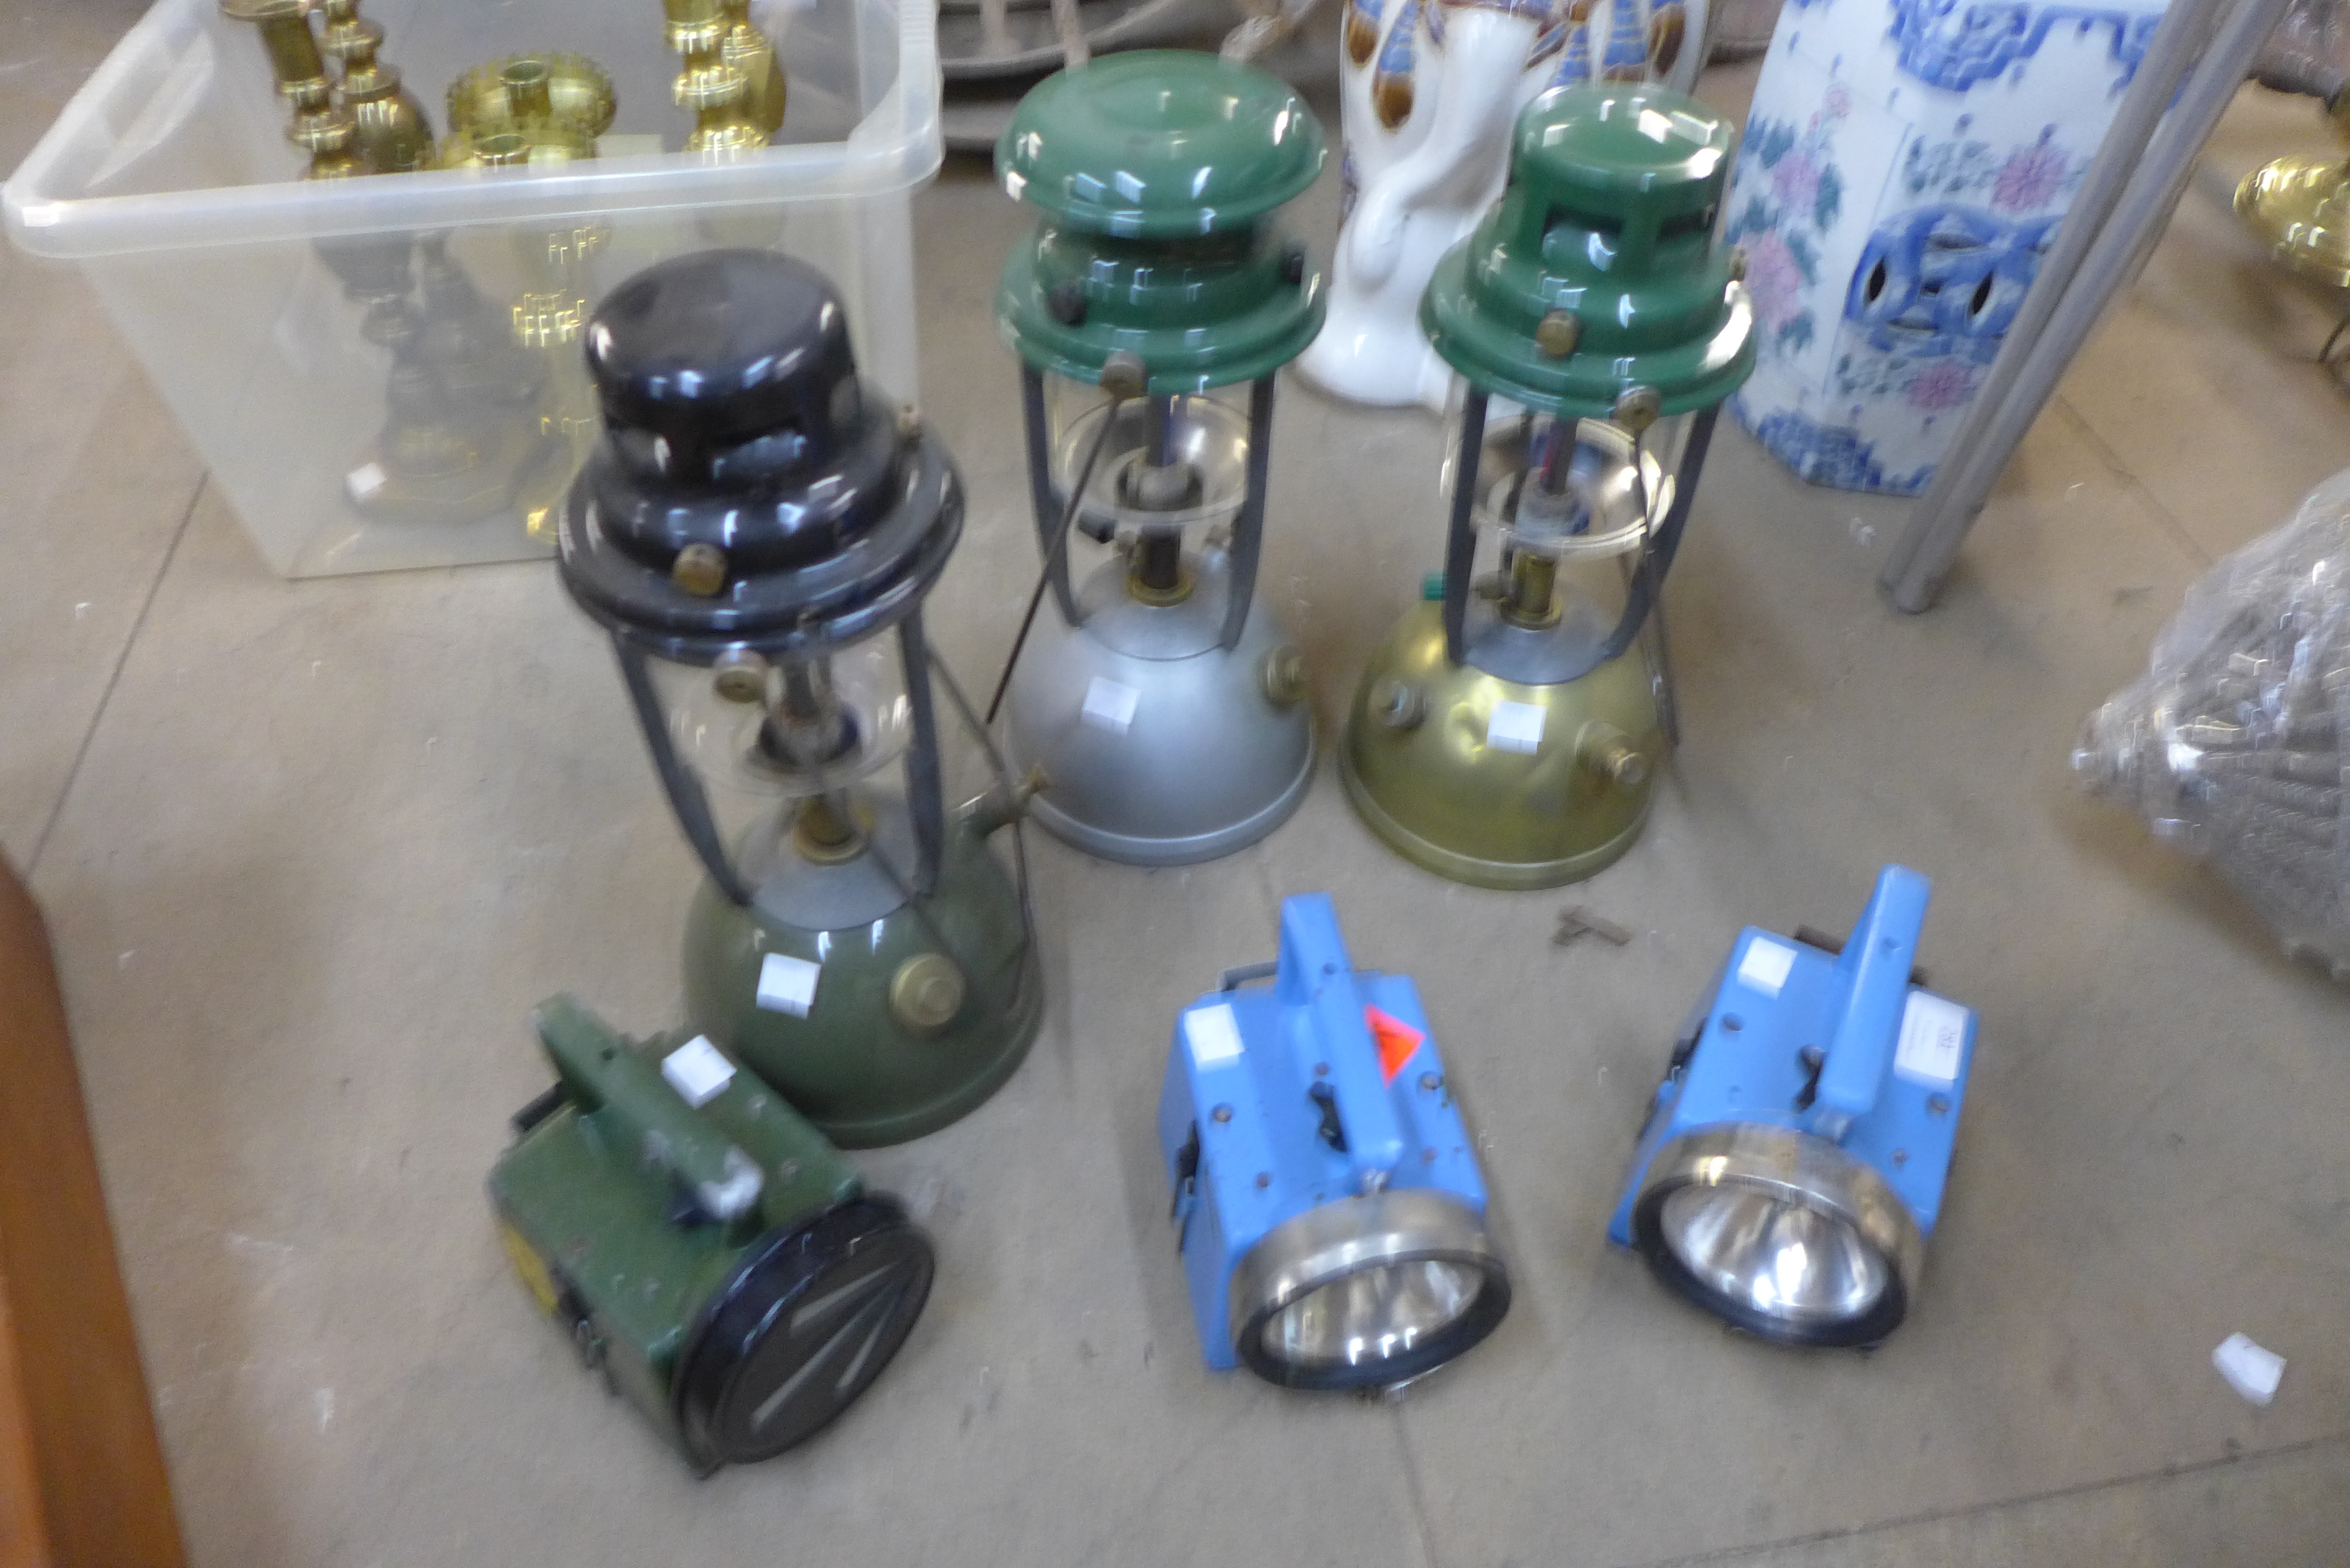 Three Tilley lamps and three miners lamps